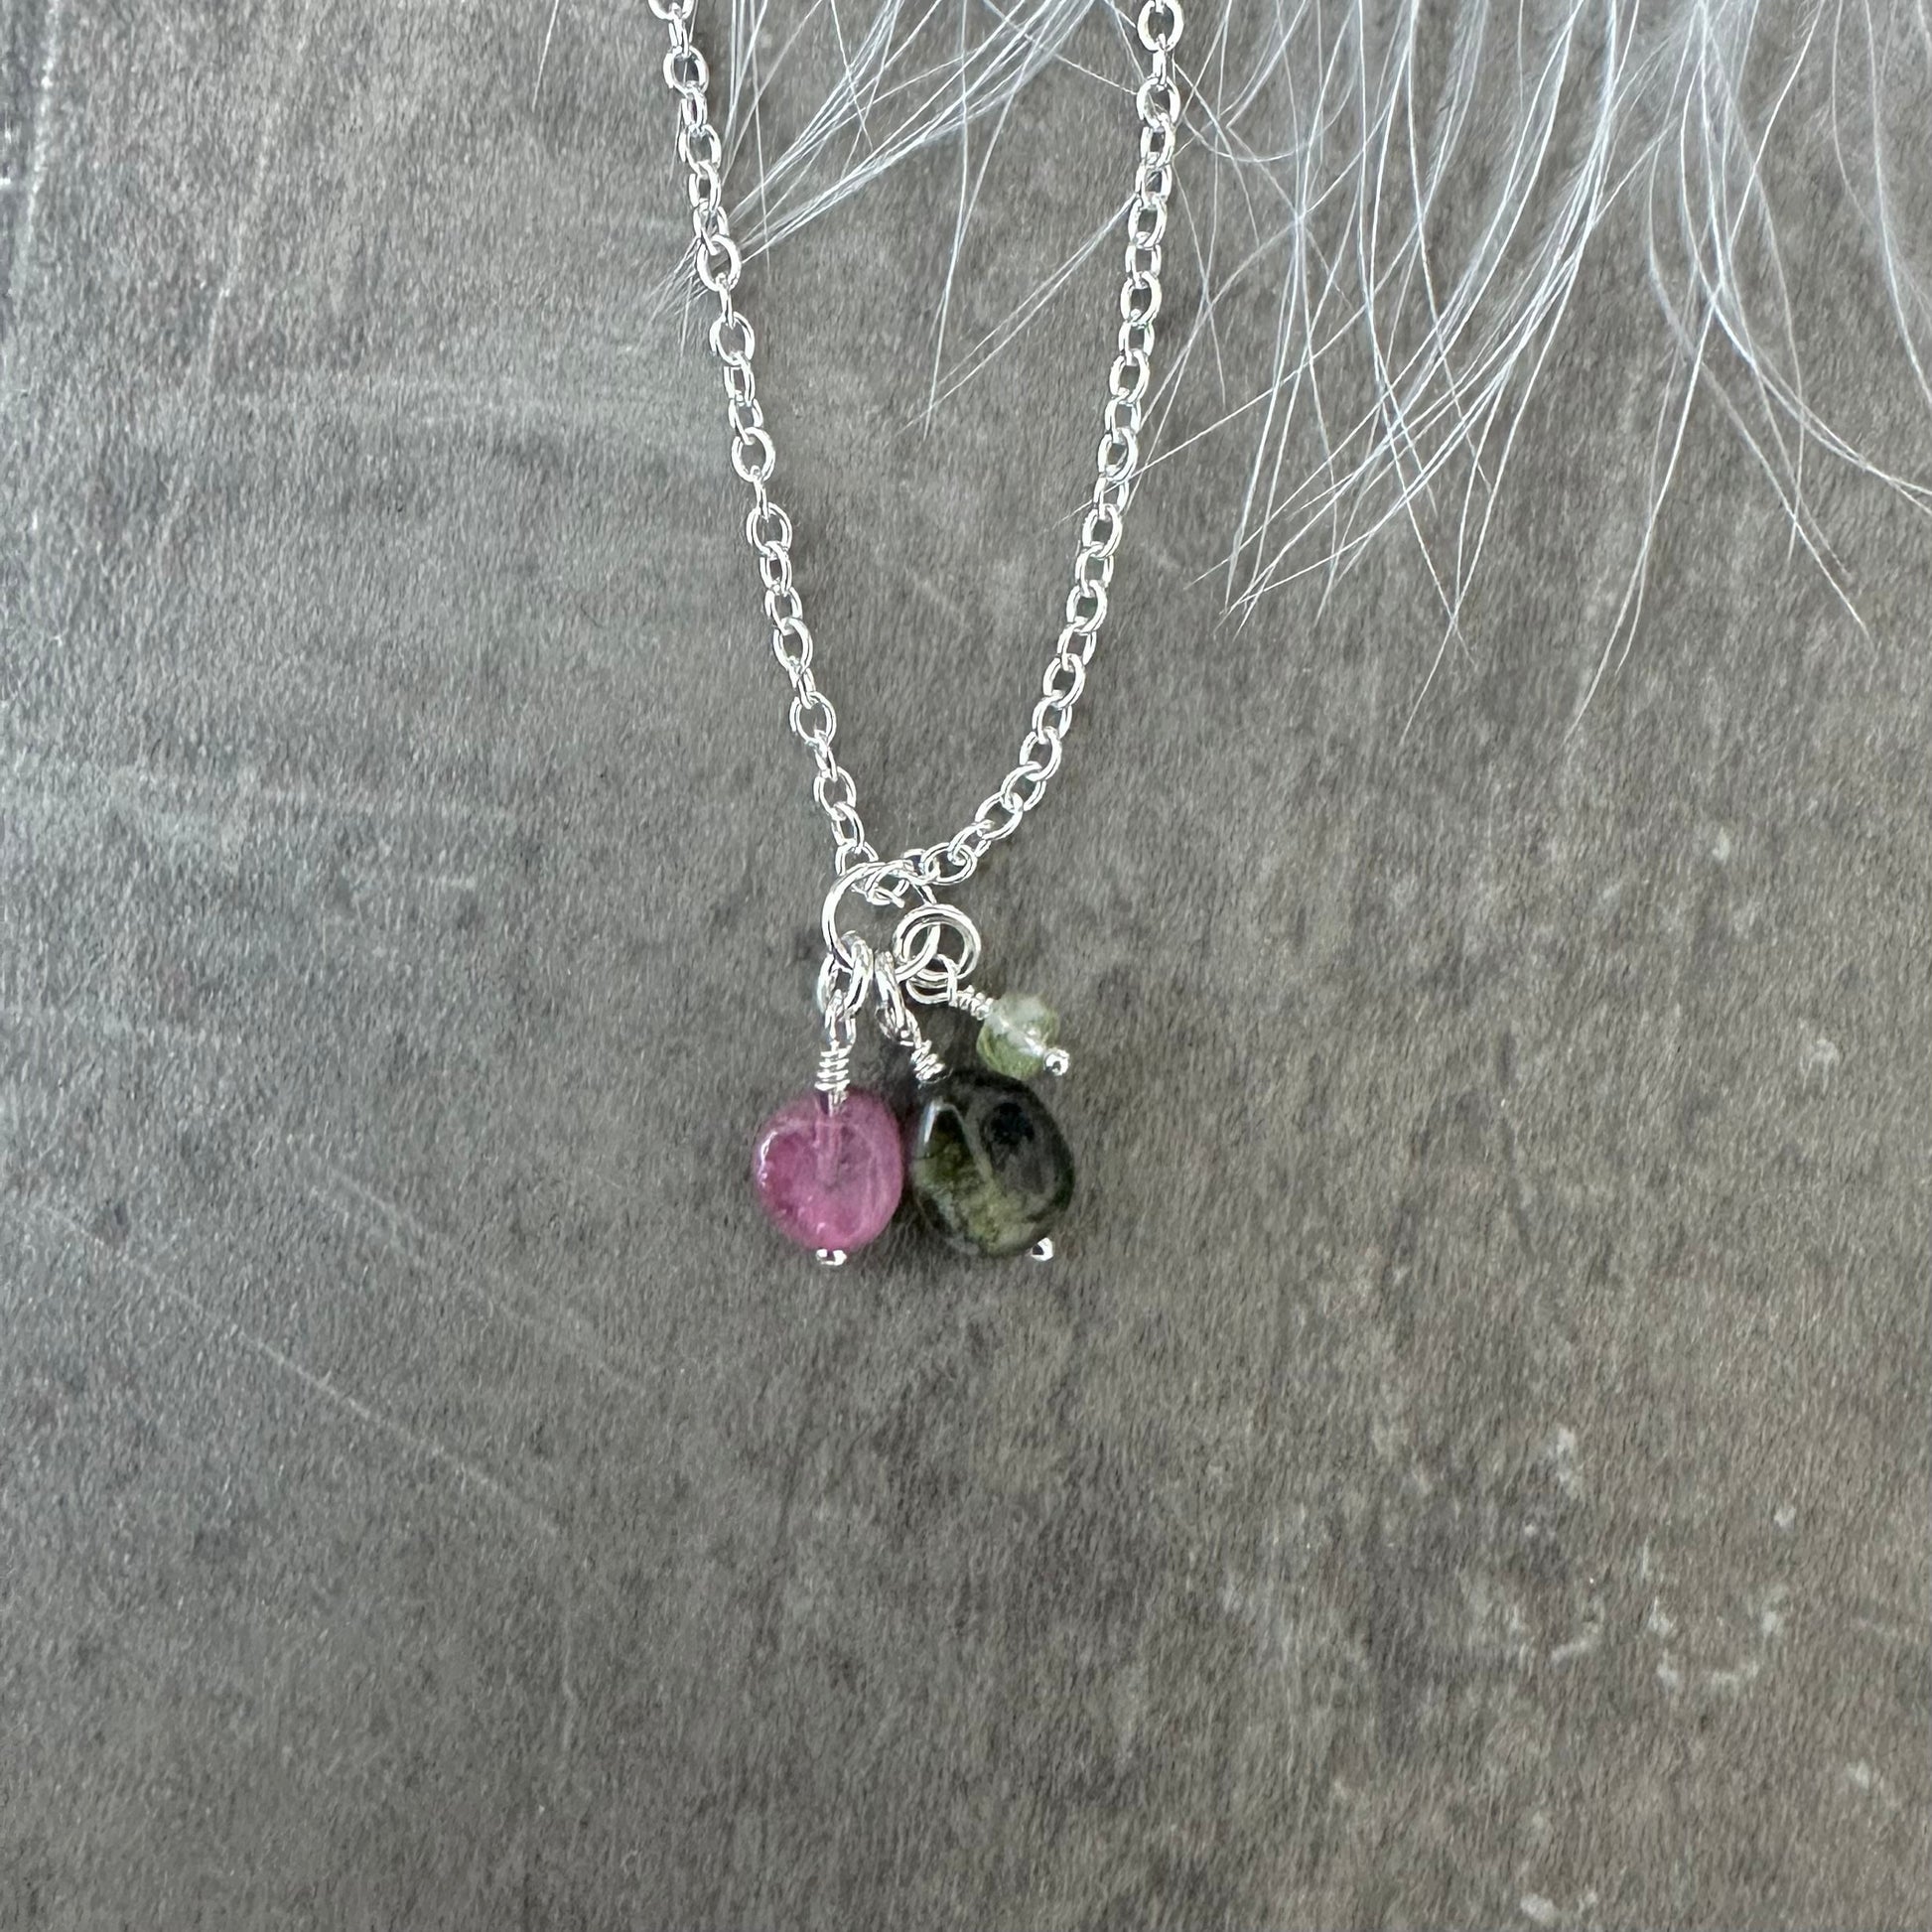 Mixed Tourmaline Nugget necklace, October birthstone jewellery sterling silver